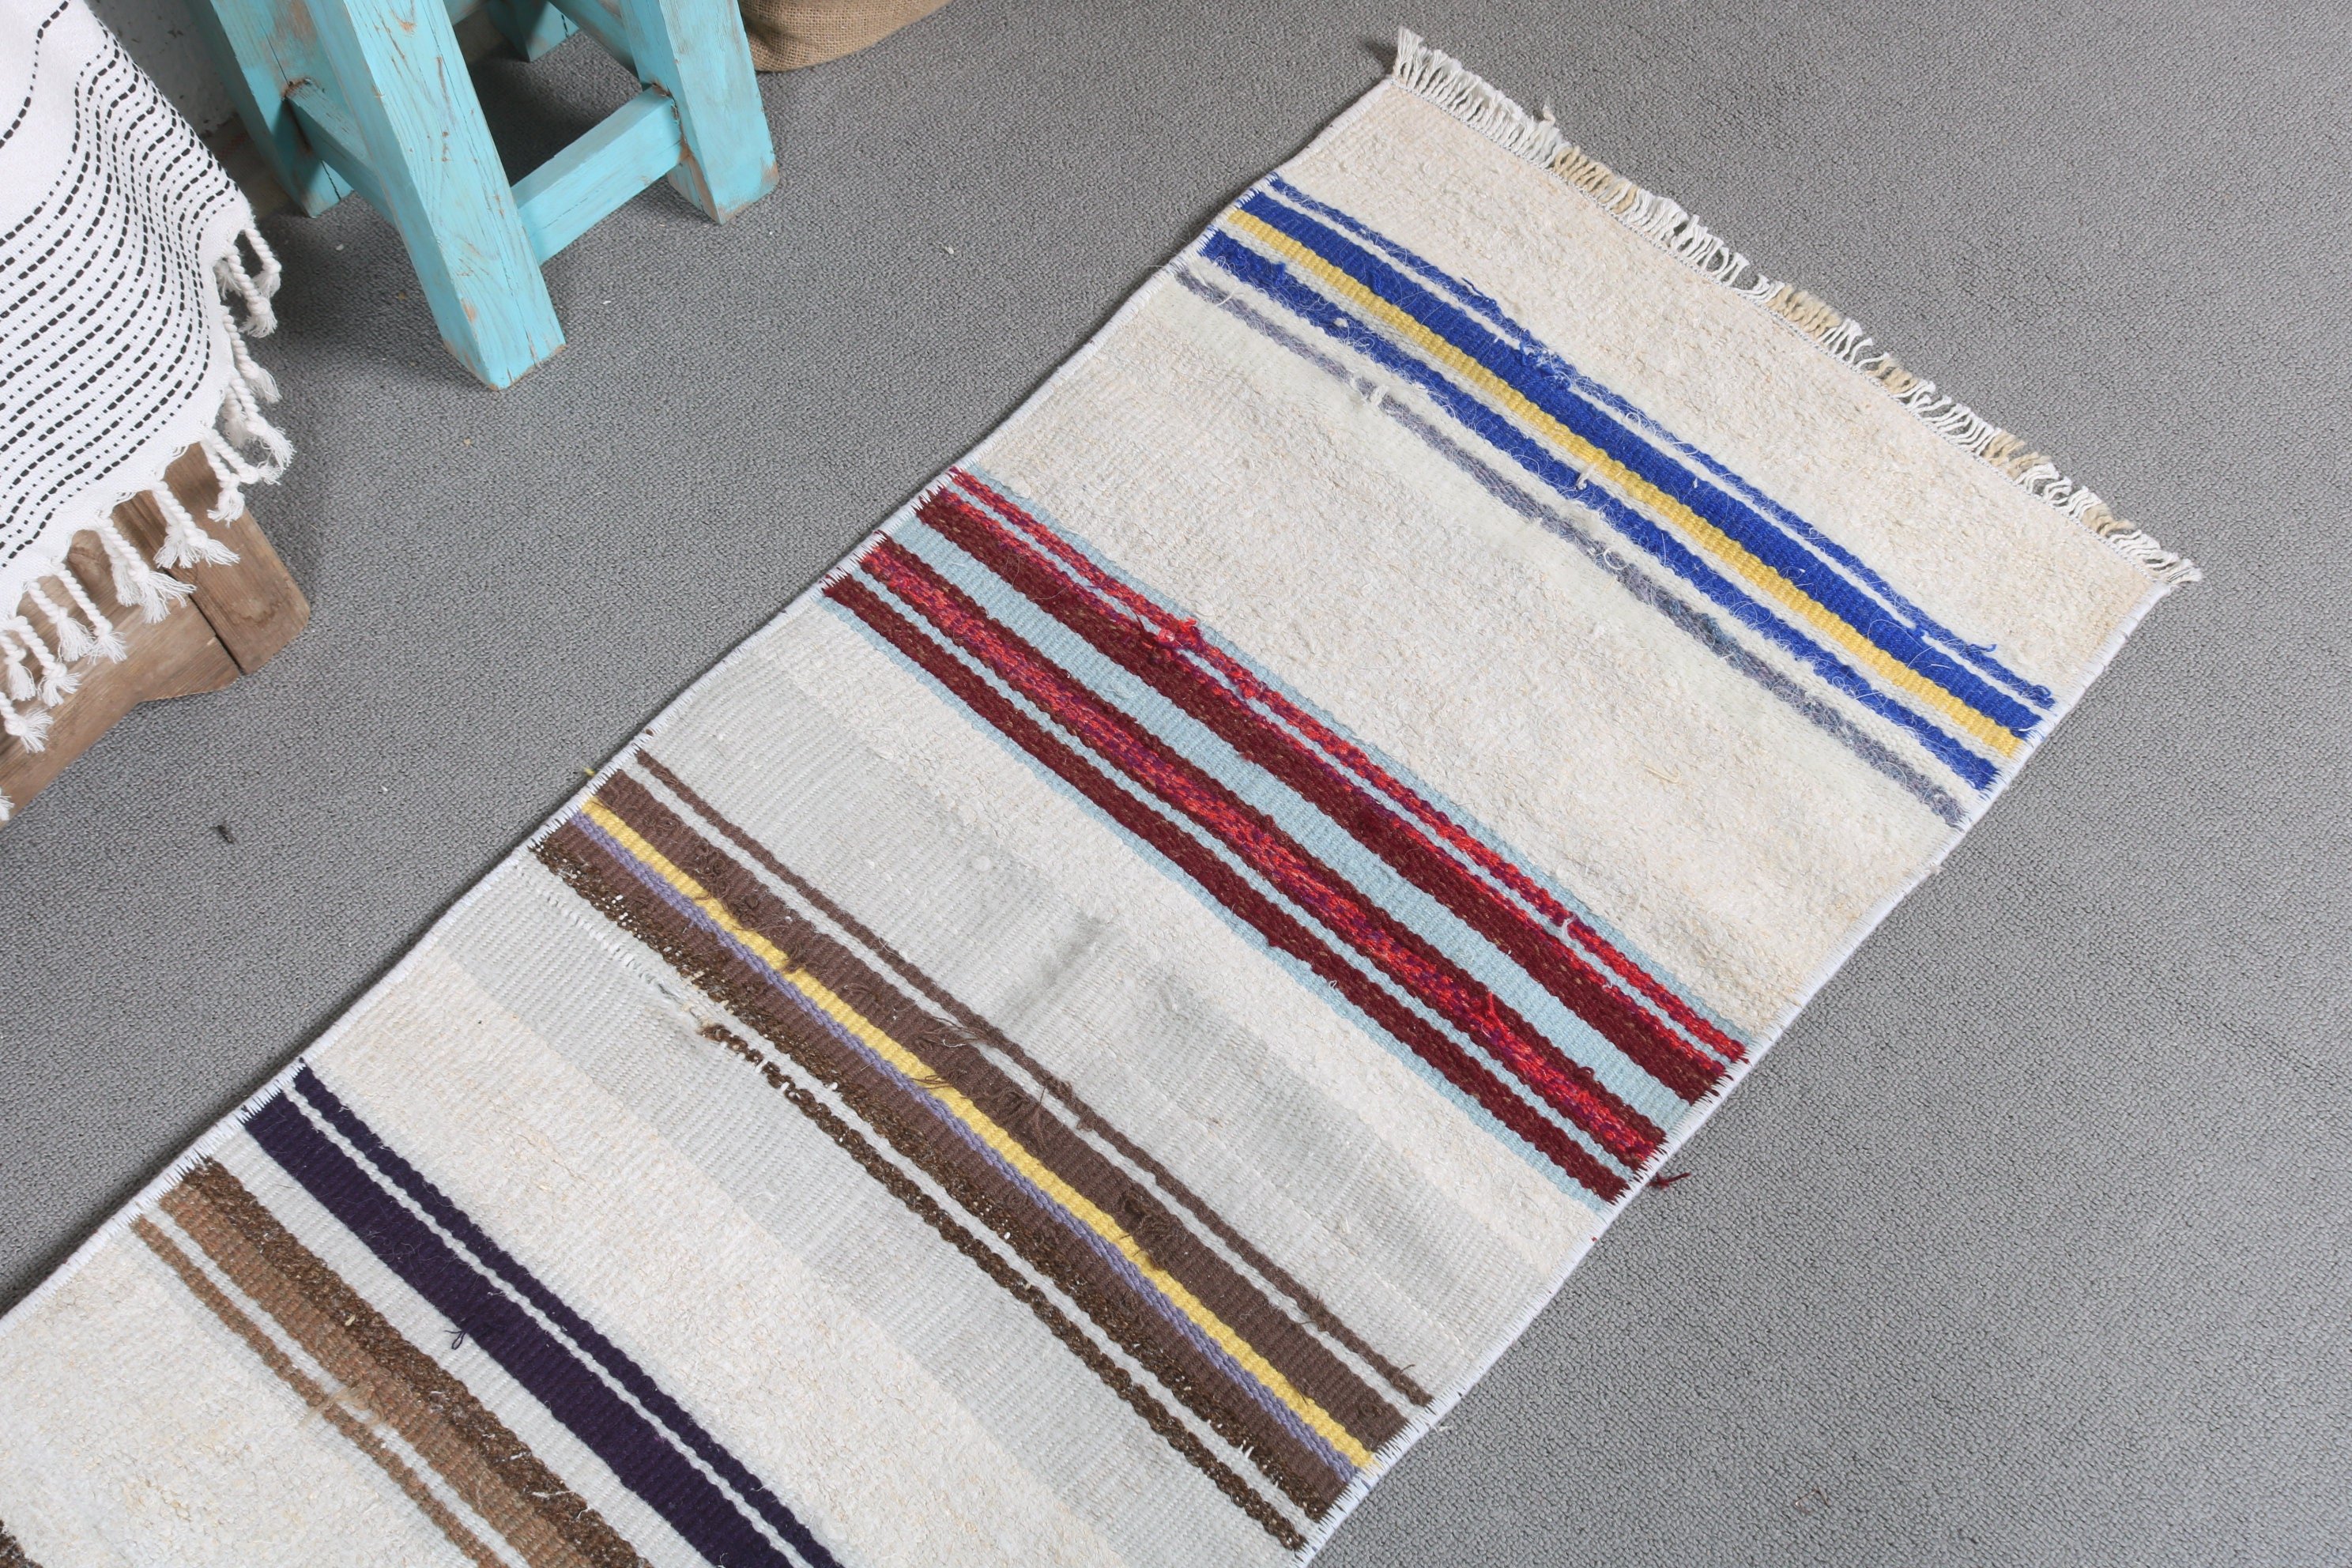 White Oushak Rugs, Kitchen Rug, Rugs for Kitchen, Turkish Rug, Eclectic Rug, 1.6x6.9 ft Runner Rugs, Moroccan Rug, Vintage Rugs, Cool Rug